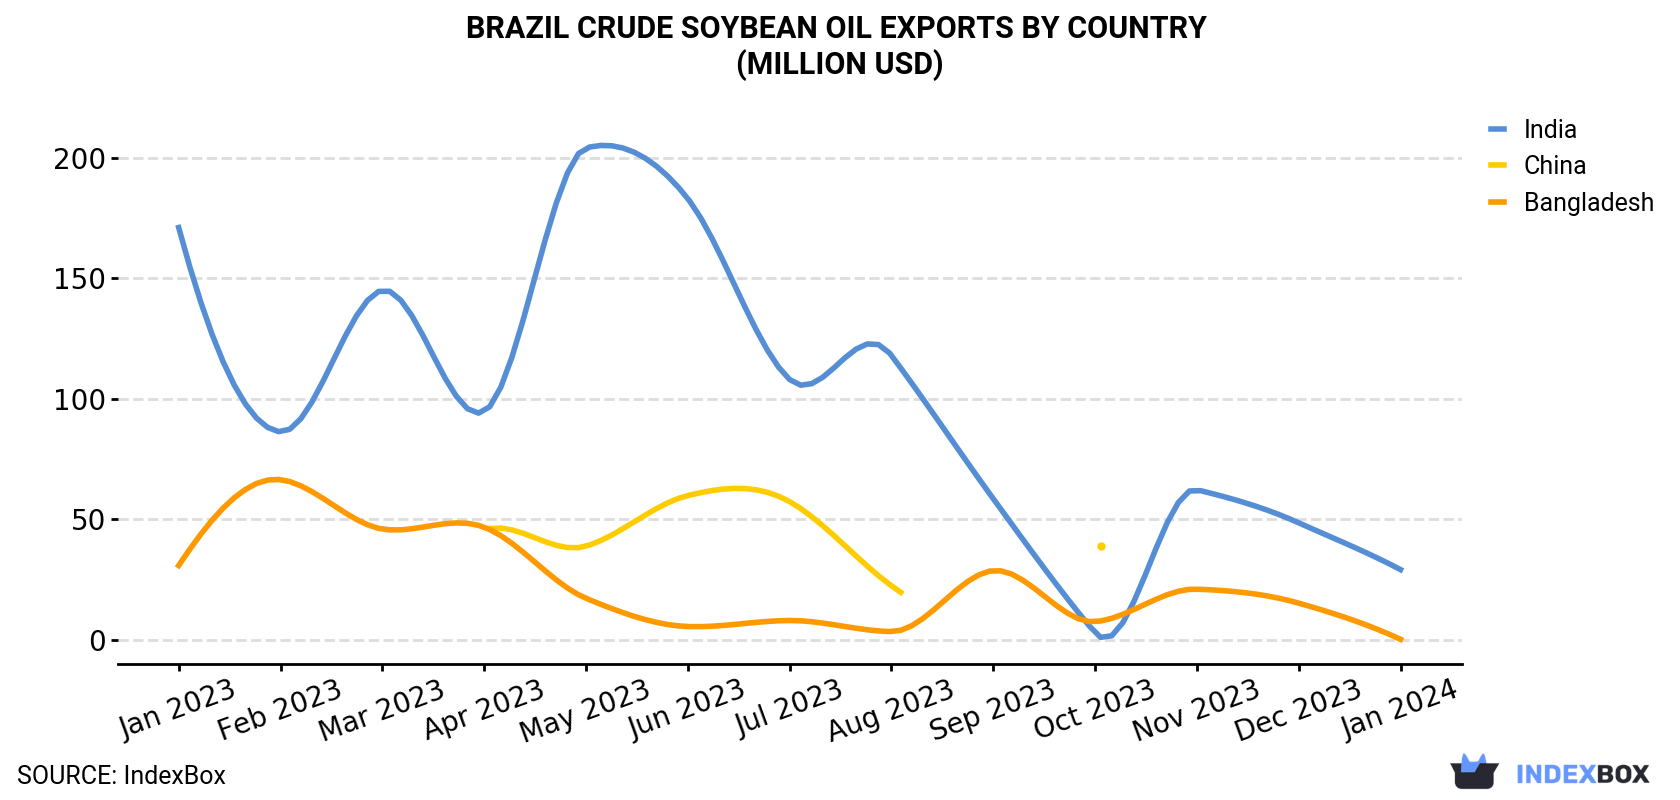 Brazil Crude Soybean Oil Exports By Country (Million USD)